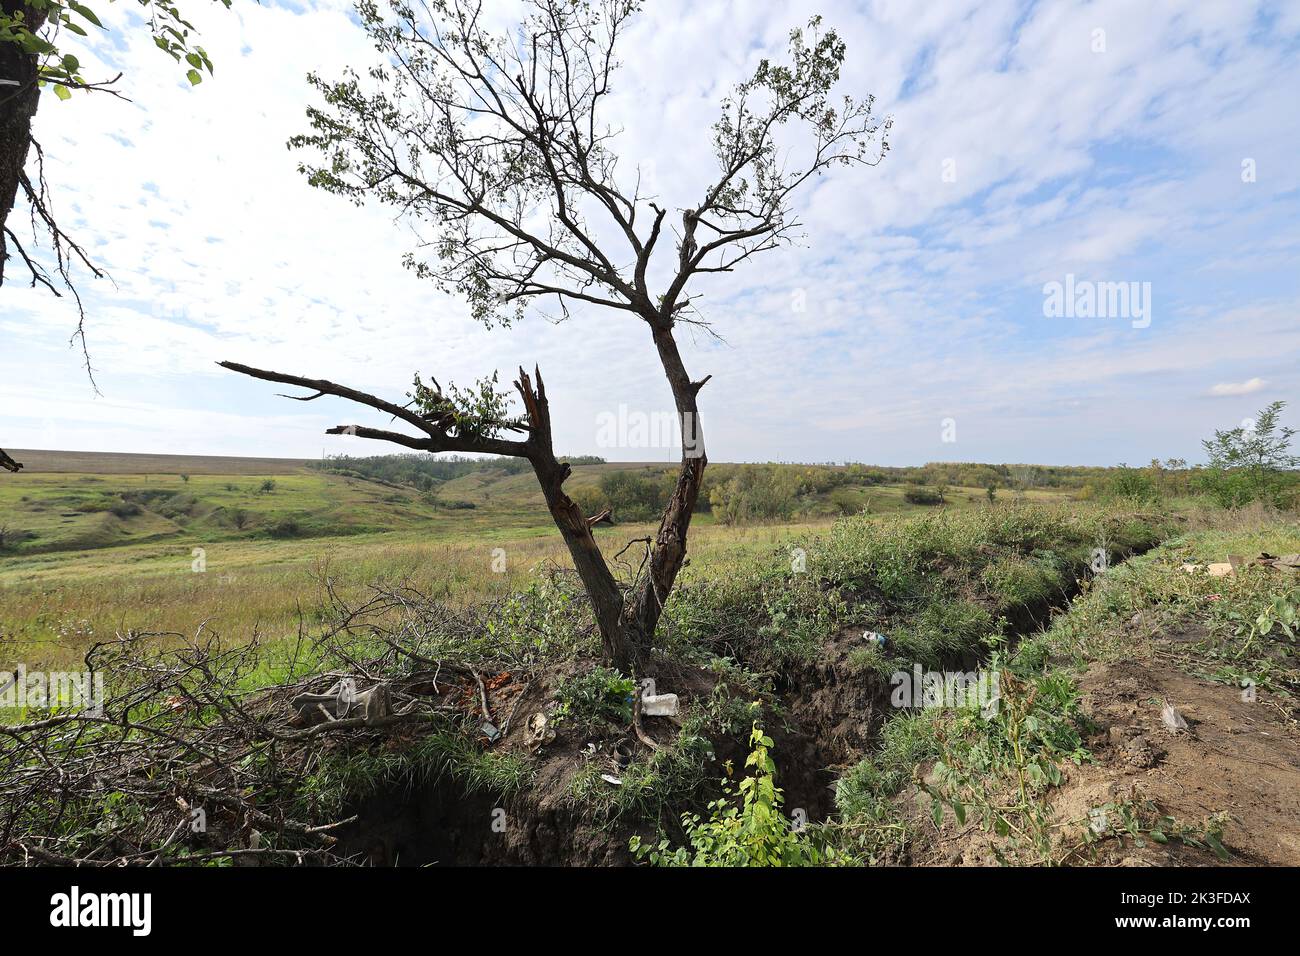 KHARKIV REGION, UKRAINE - SEPTEMBER 26, 2022 - A trench dug in the ground at the former combat positions of Ukrainian servicemen in the village of Dementiyivka recently liberated from russian invaders, Kharkiv Region, north-eastern Ukraine. Stock Photo